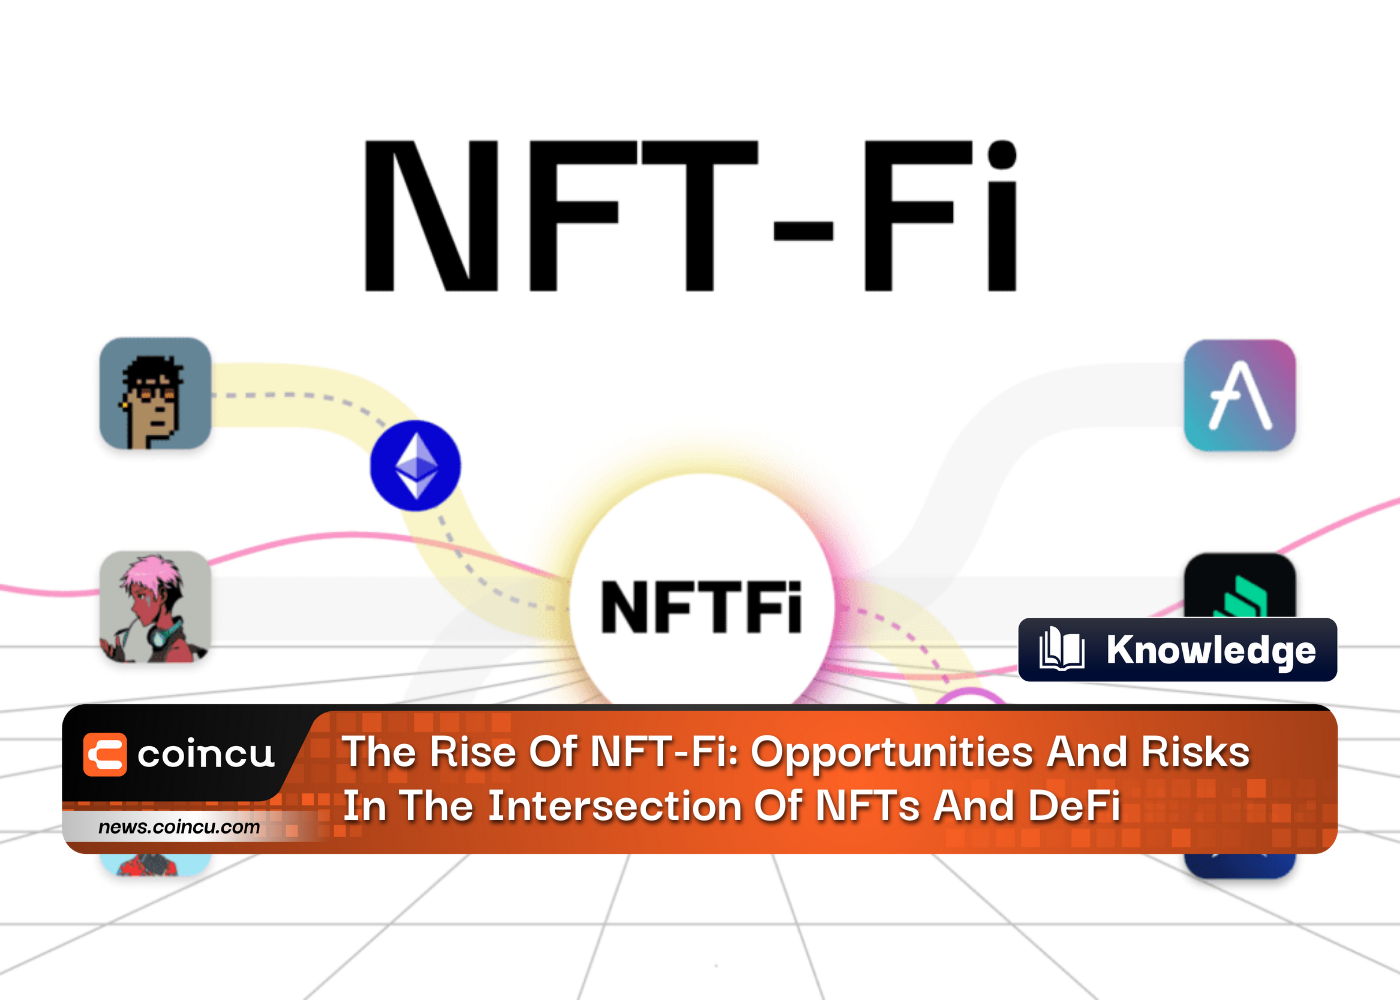 The Rise Of NFT-Fi: Opportunities And Risks In The Intersection Of NFTs And DeFi